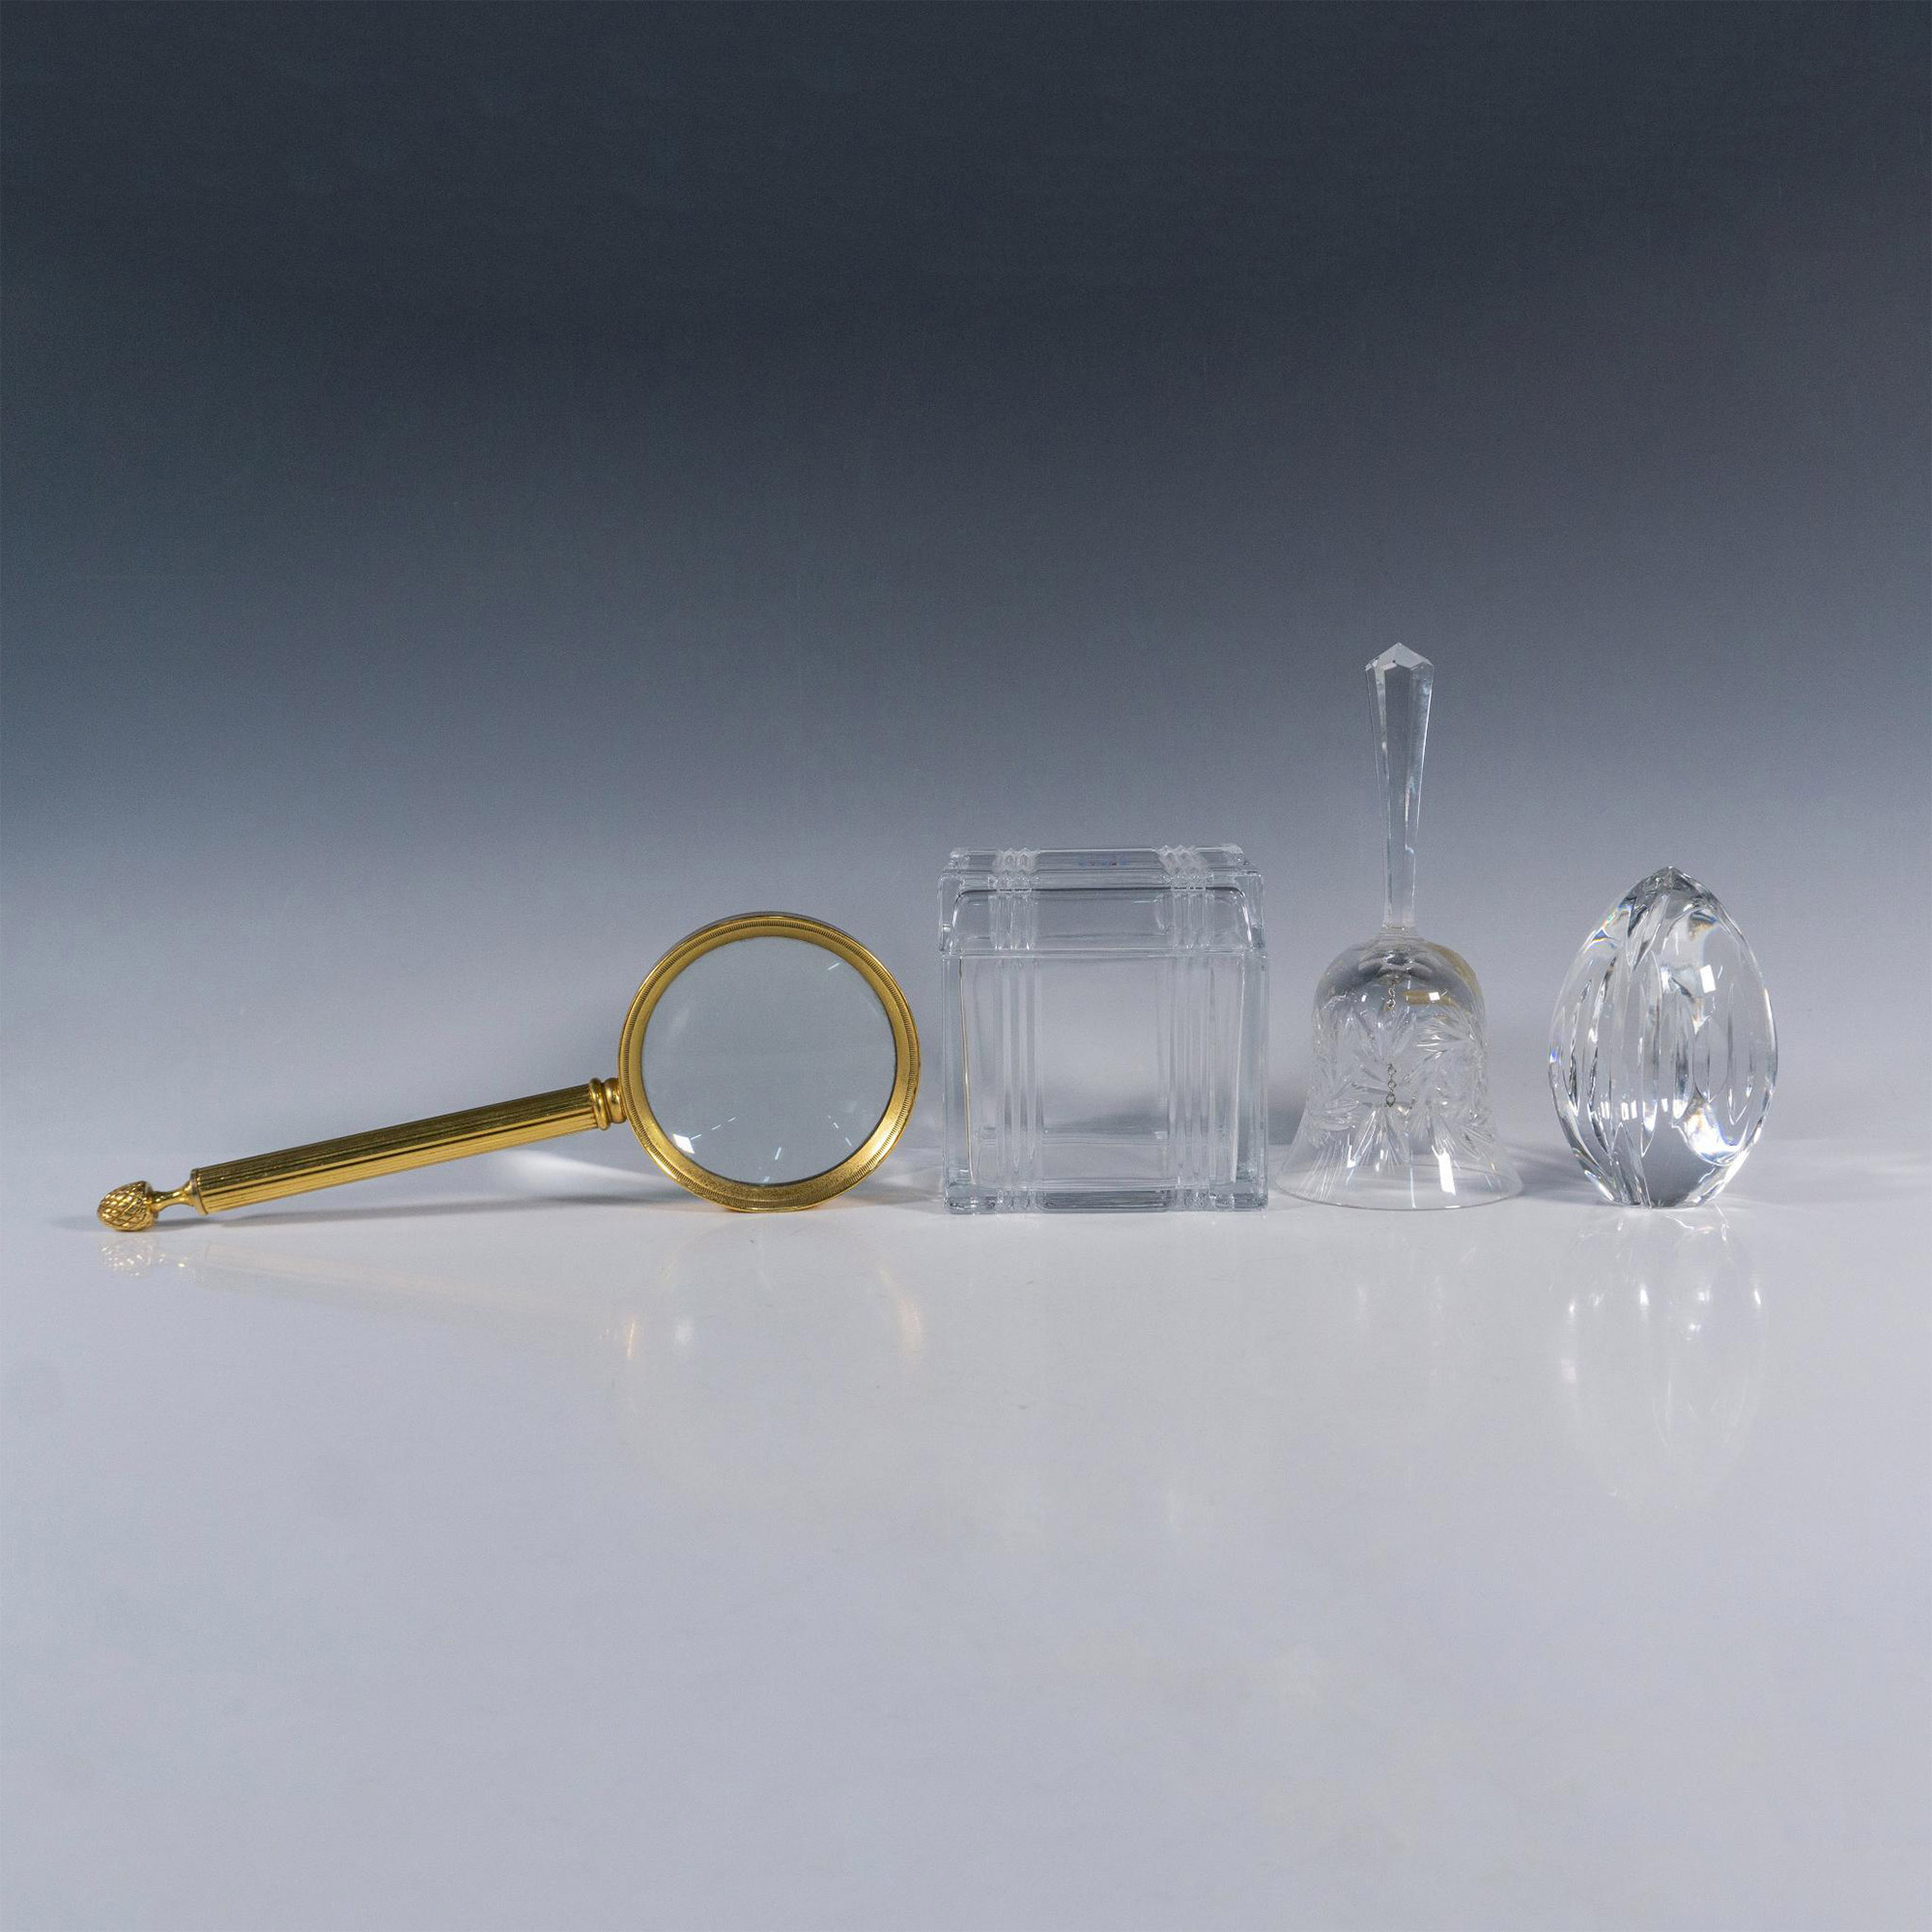 4pc Crystal Desk Accessories & Gold Magnifying Glass